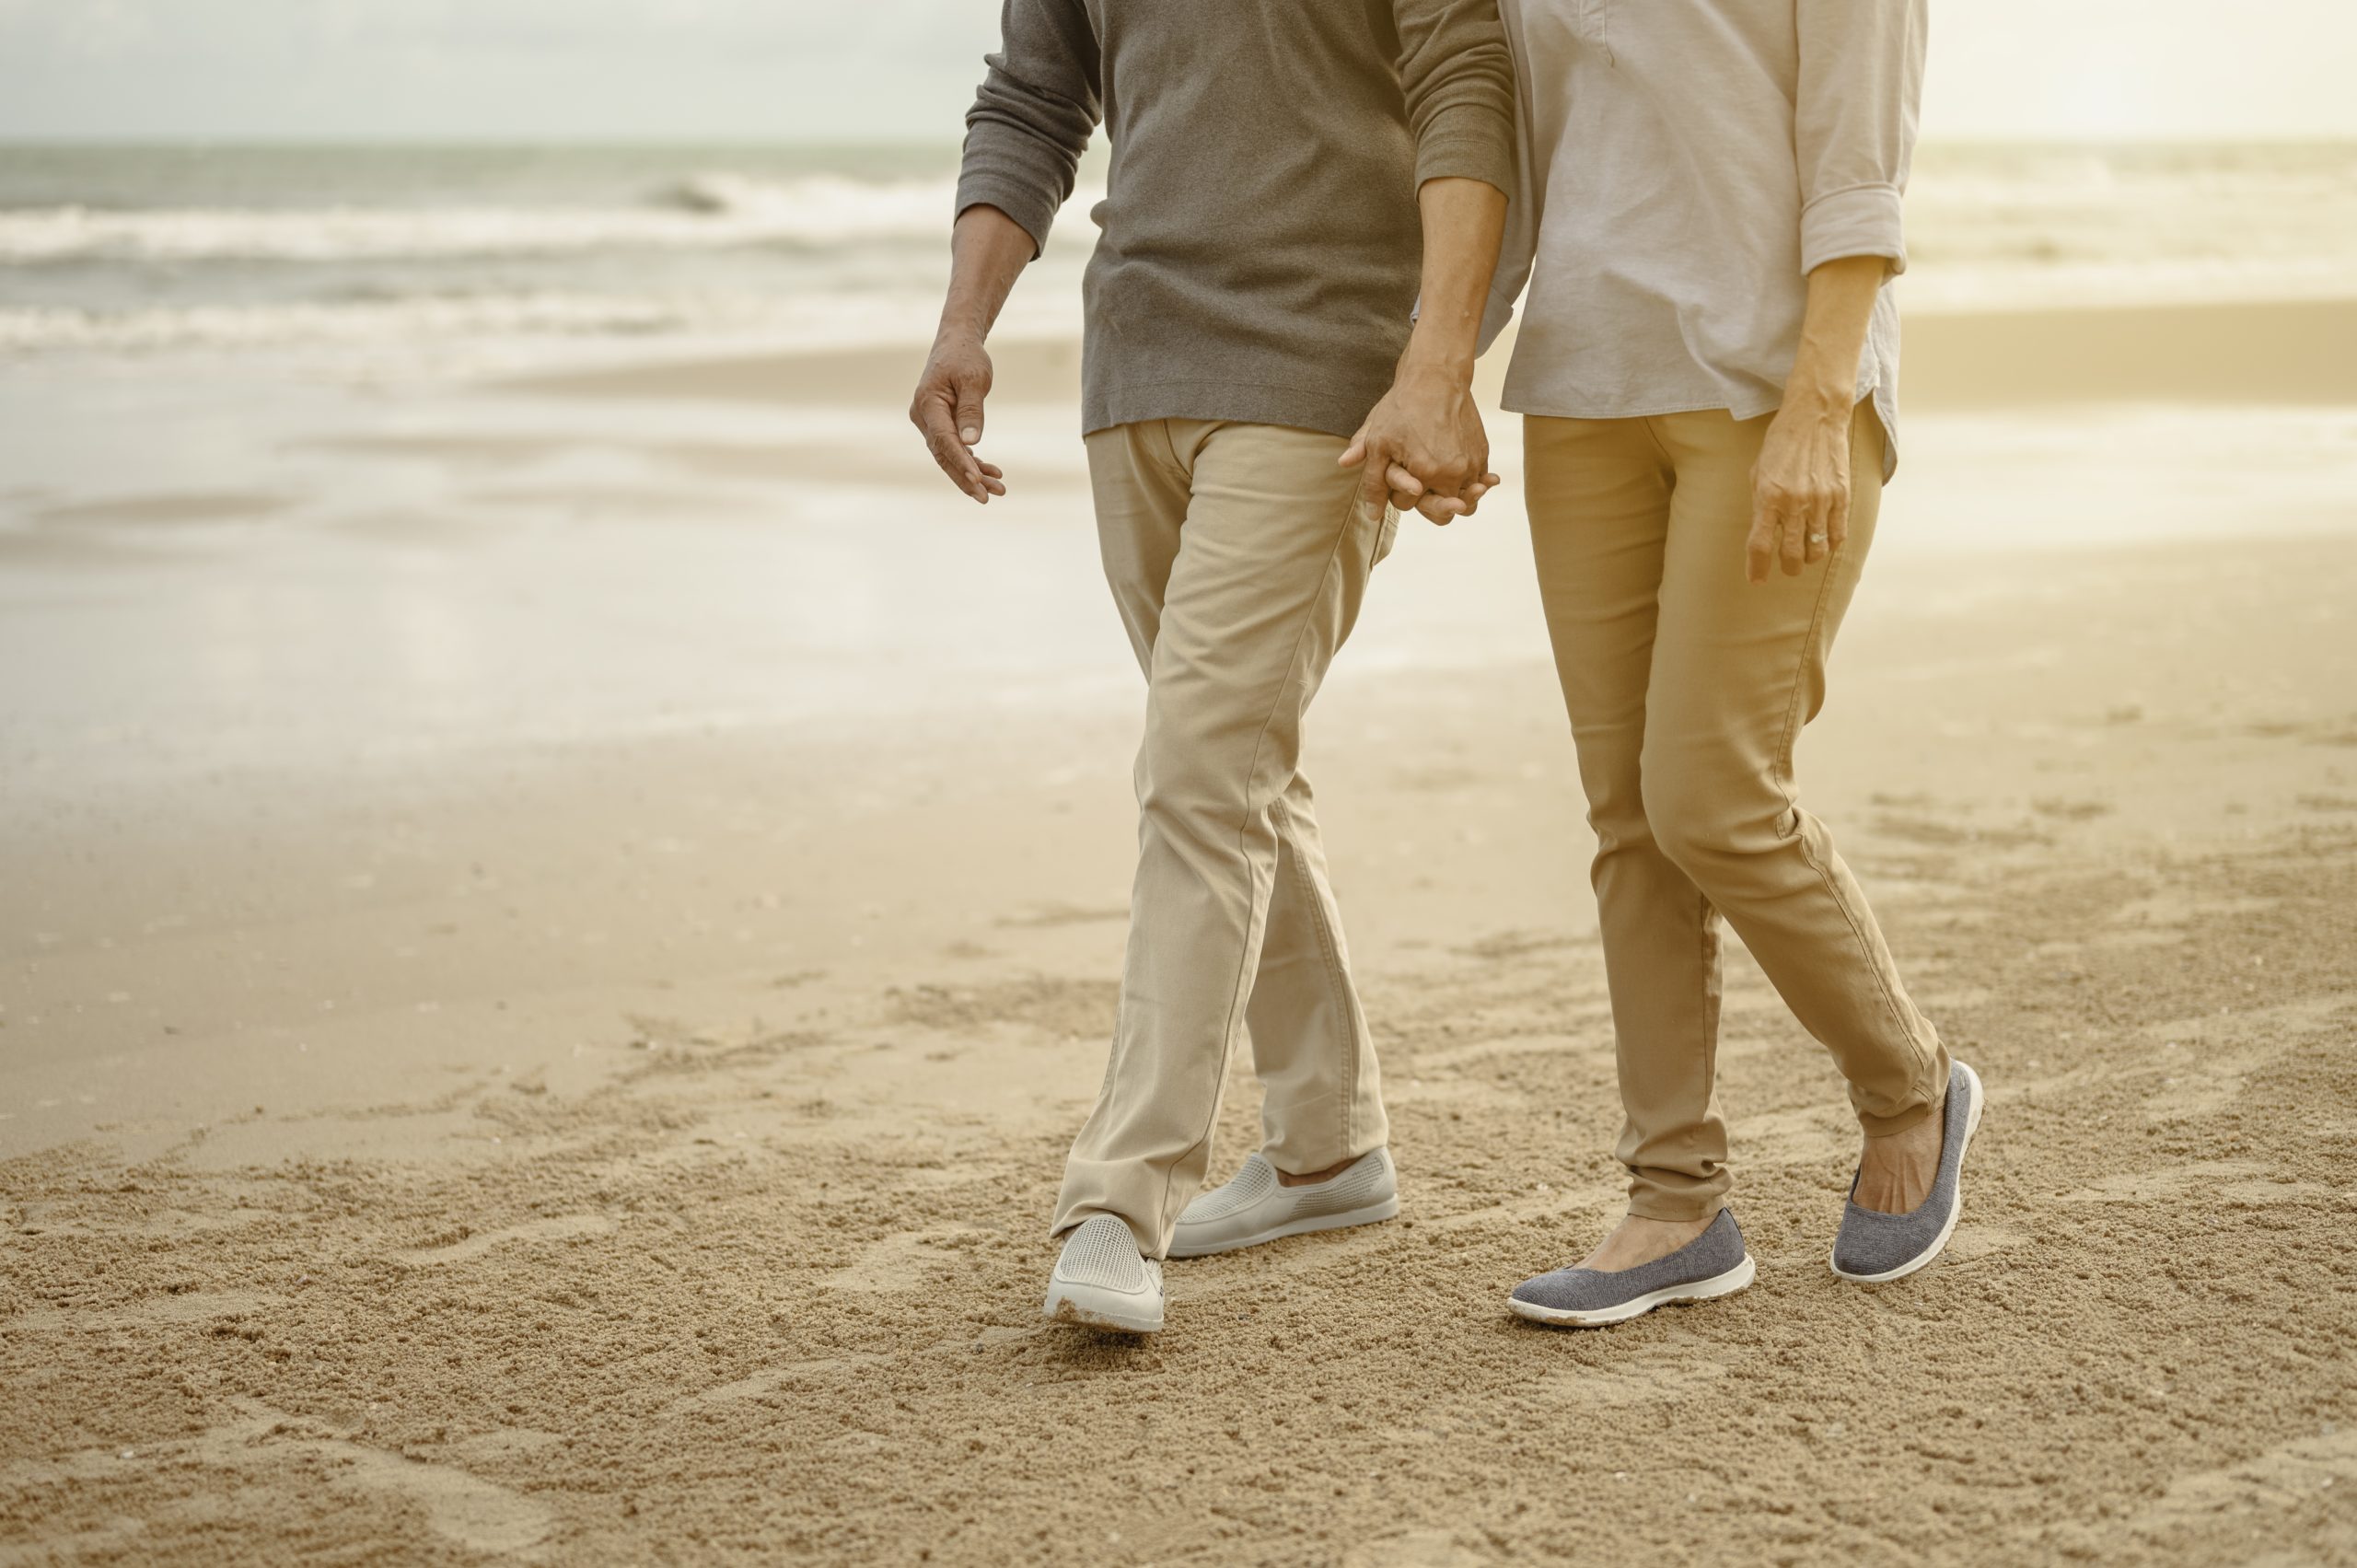 Senior lovers walk hand in hand at the beach at sunset, plan life insurance at retirement concept.